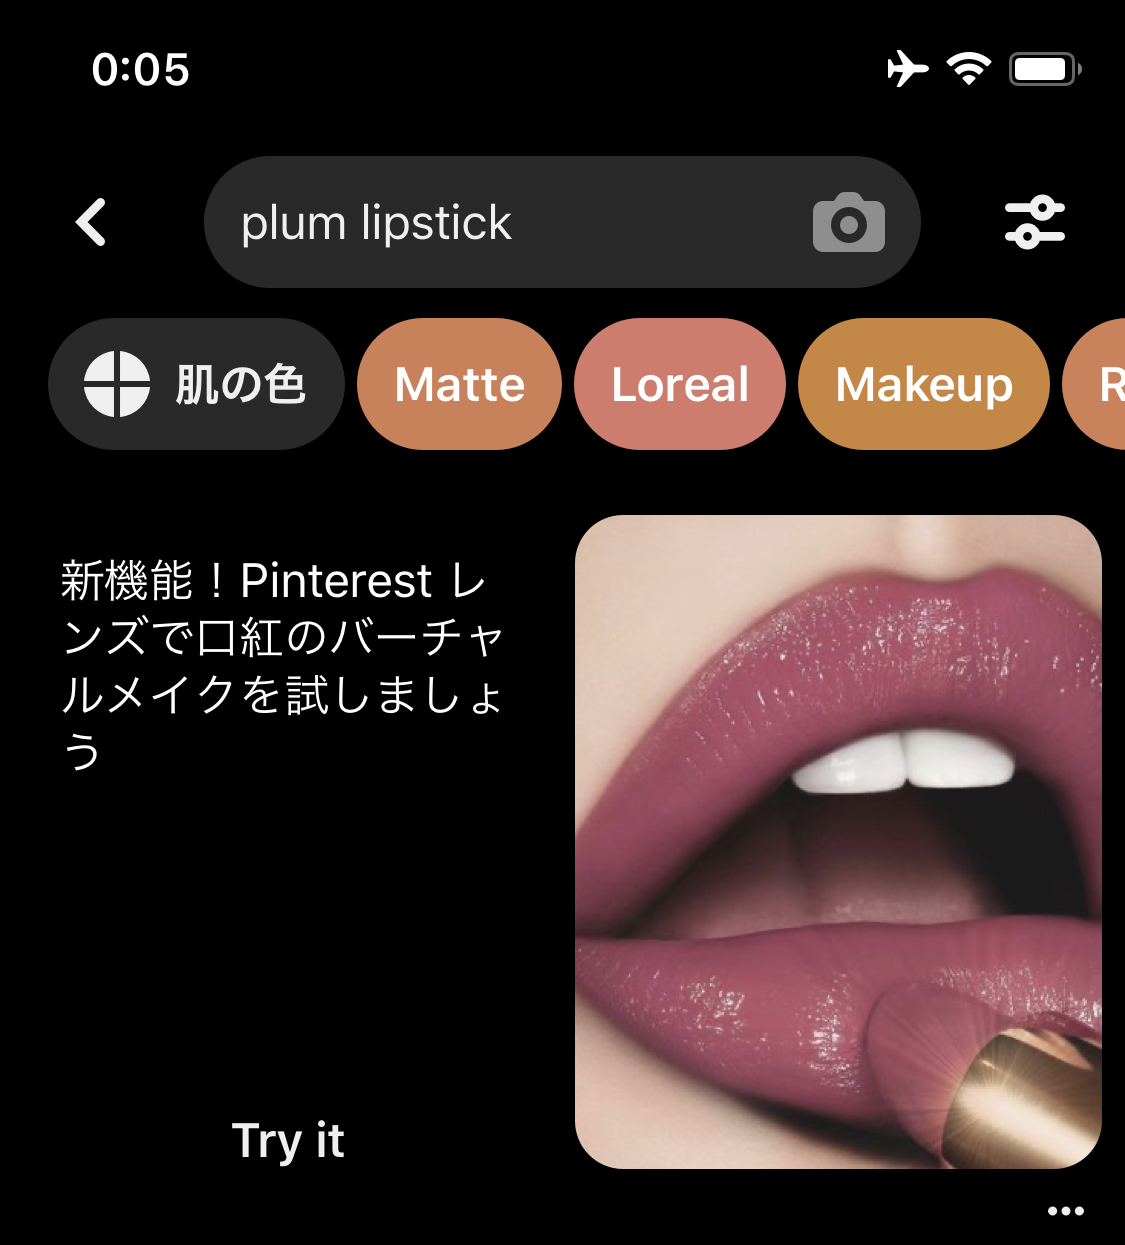 Pinterest rolled out “Try on” new feature.Virtual Make Up with lips.Pinteres lens(AR camera). Updates Changes Latest News Jan 2020